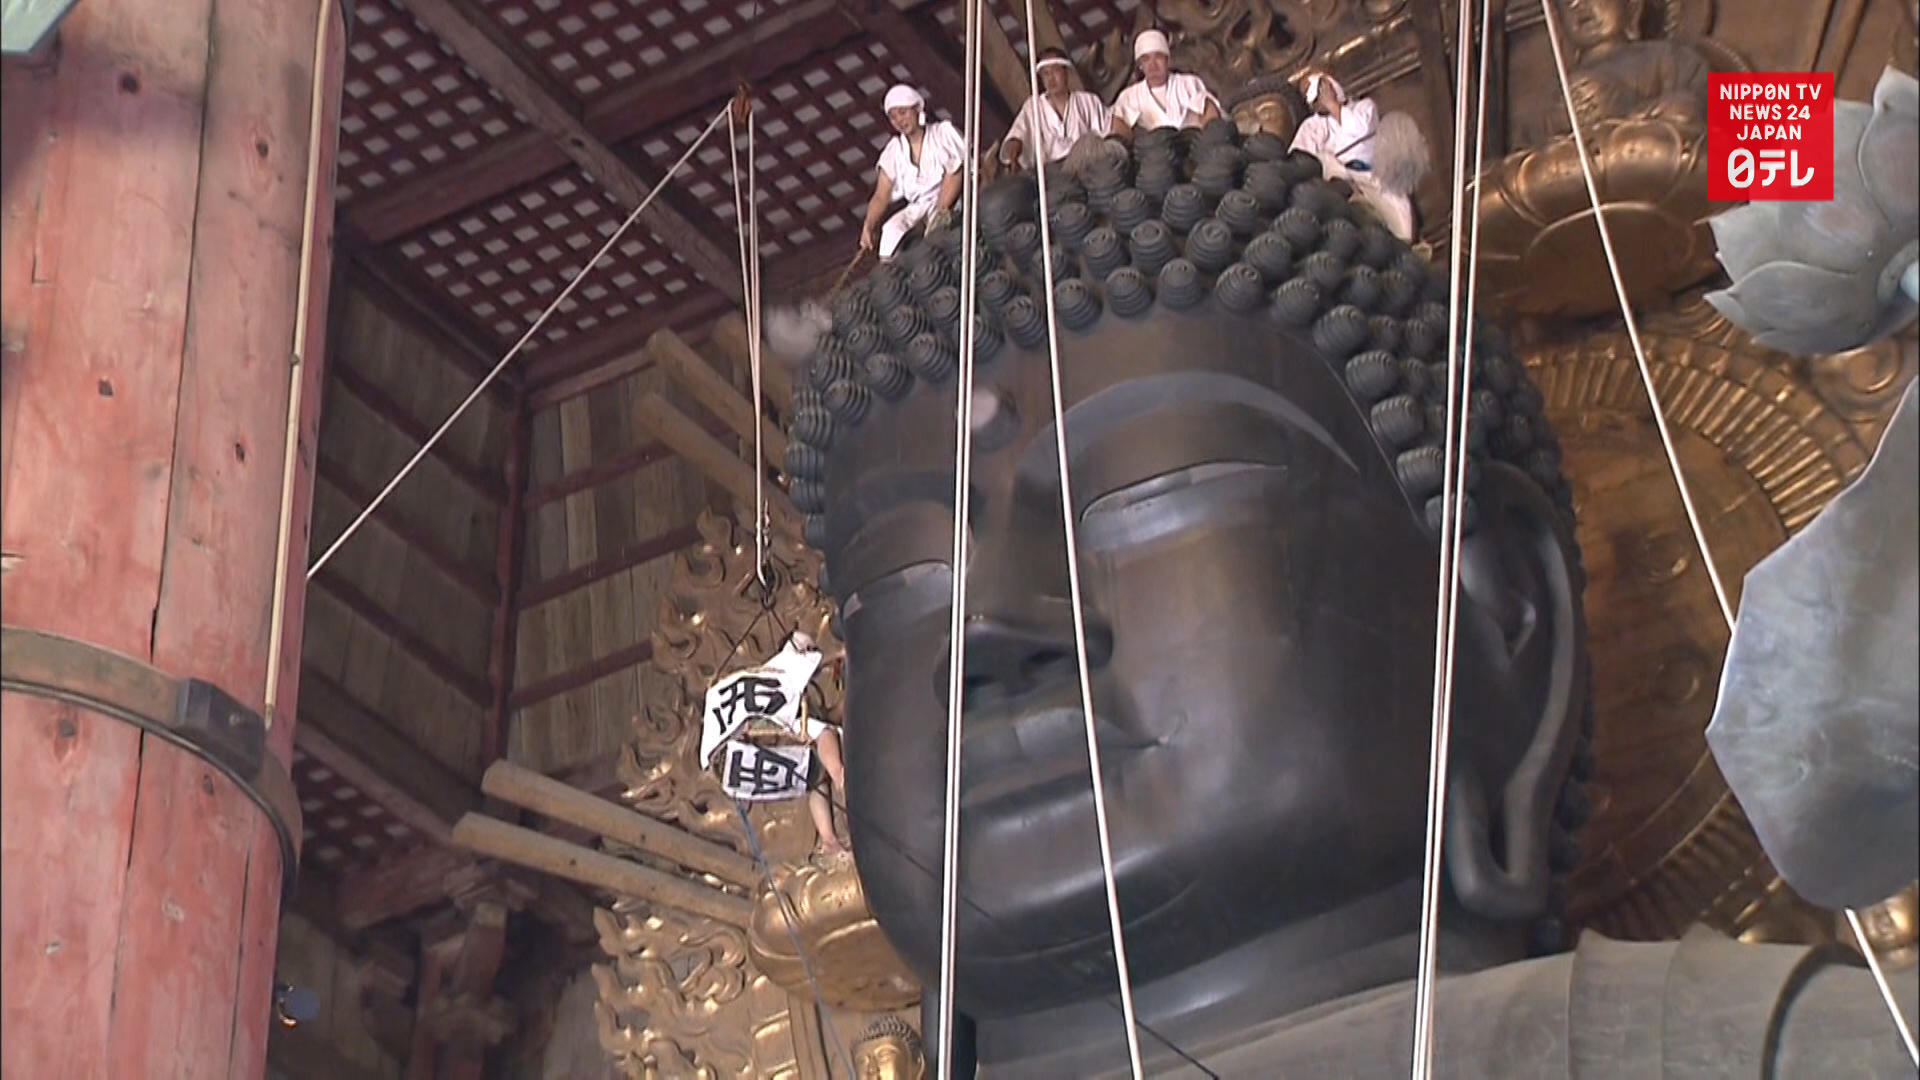 Giant Buddha cleaned before Obon holiday